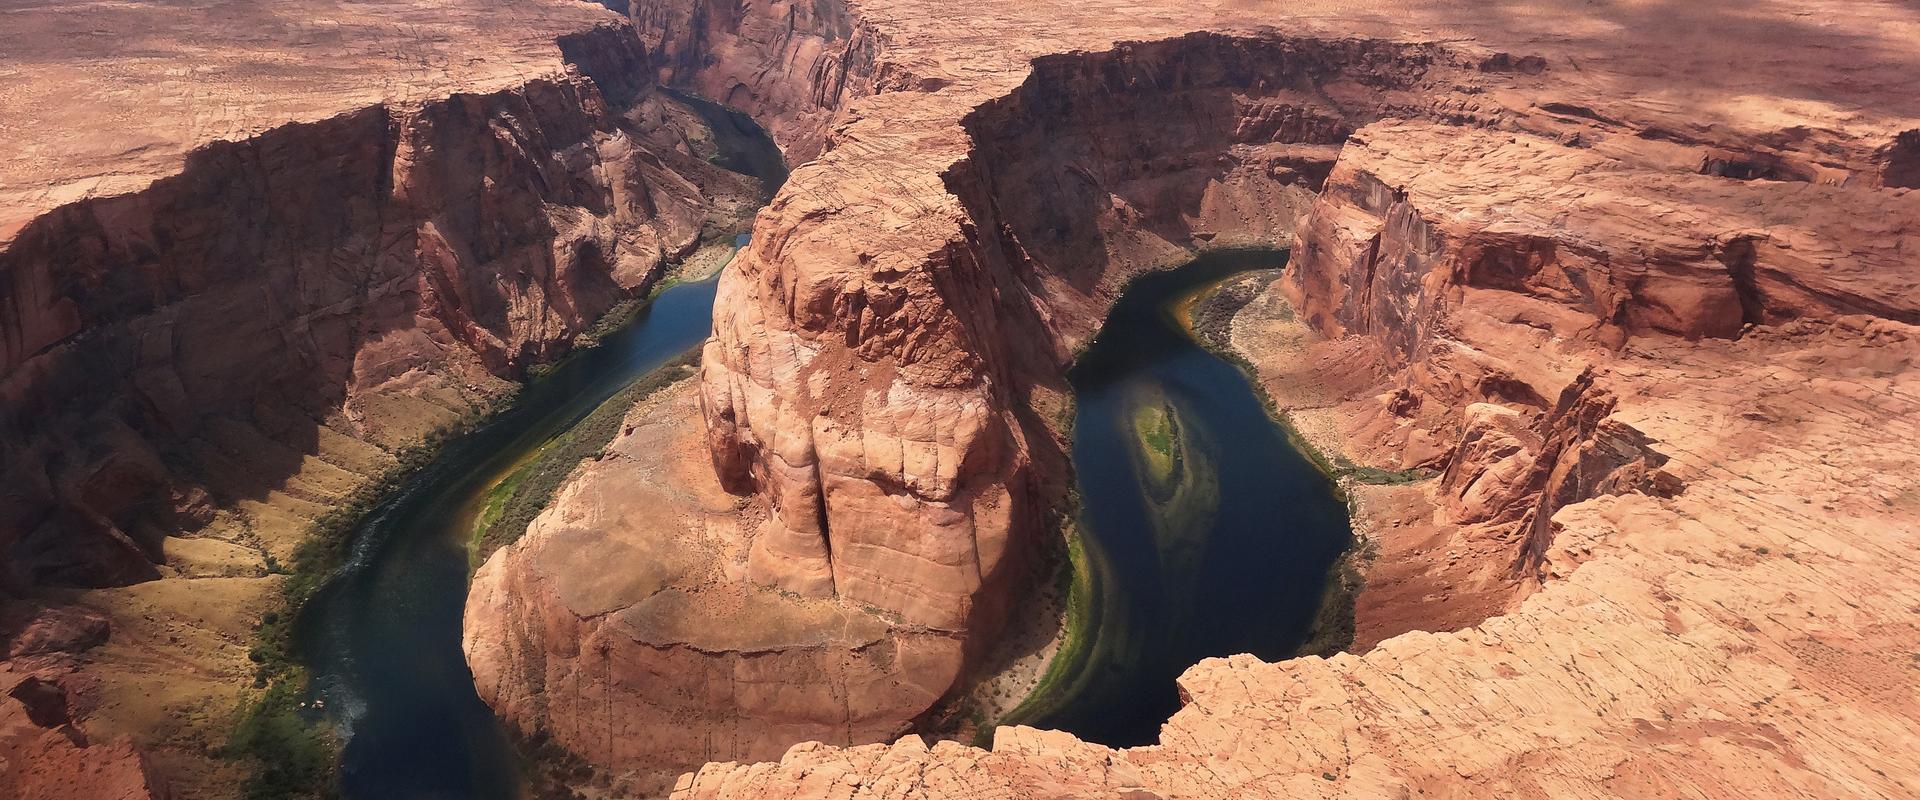 Plane flight over Lake Powell and the Colorado River, United States